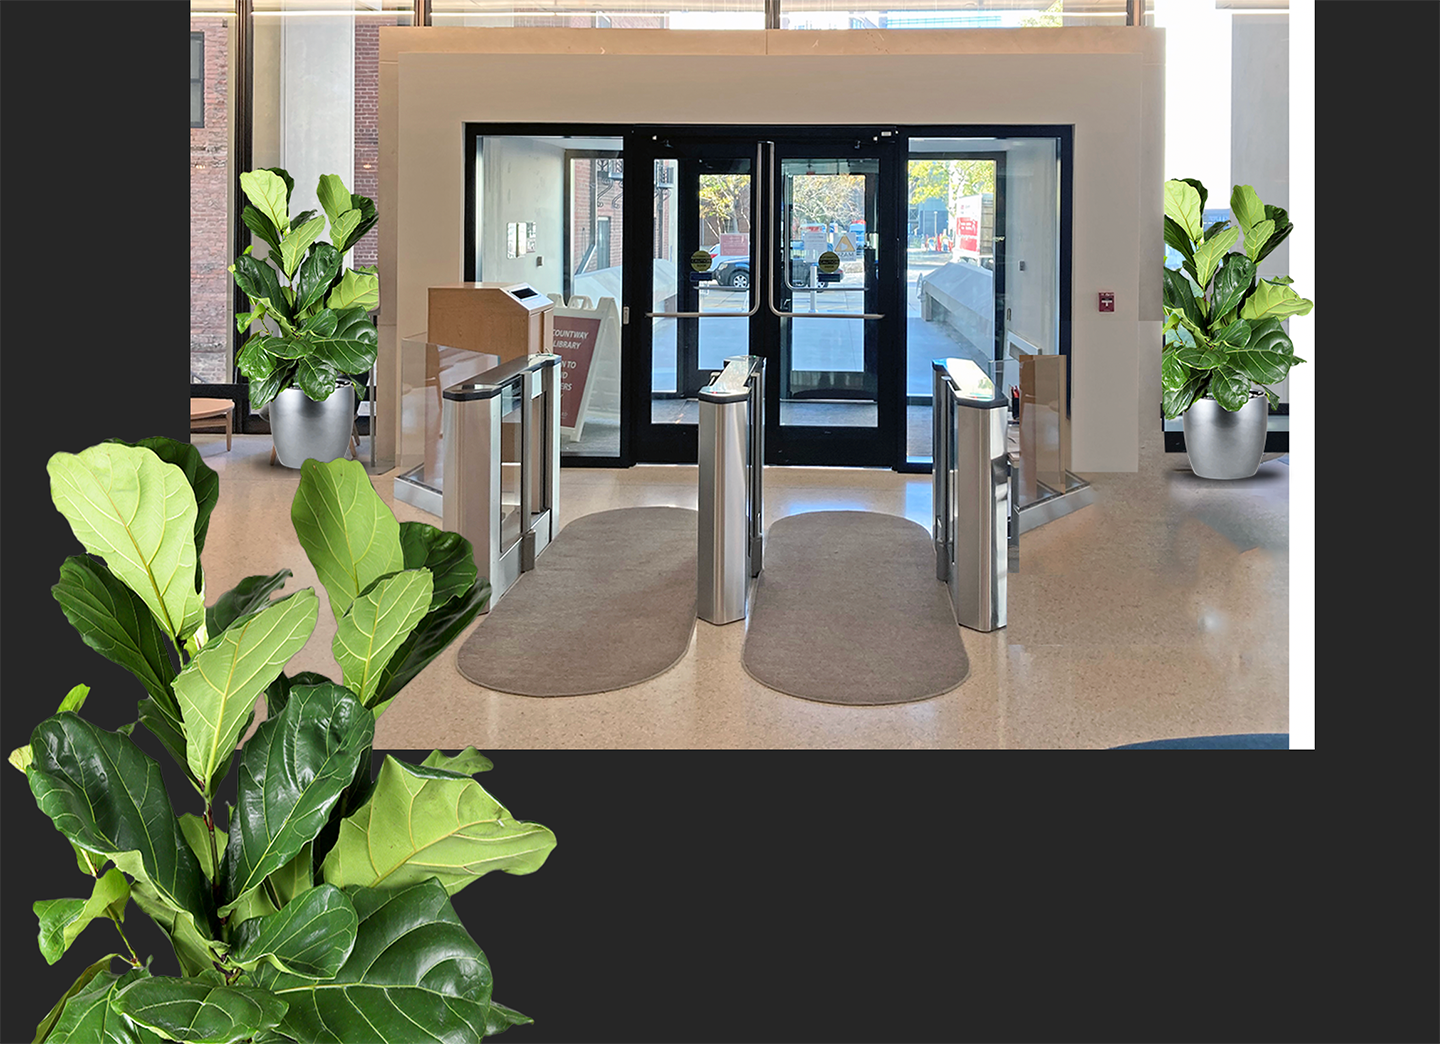 artist's rendition of the new fiddle leaf fig bush plants to be added at the Shattuck entrance